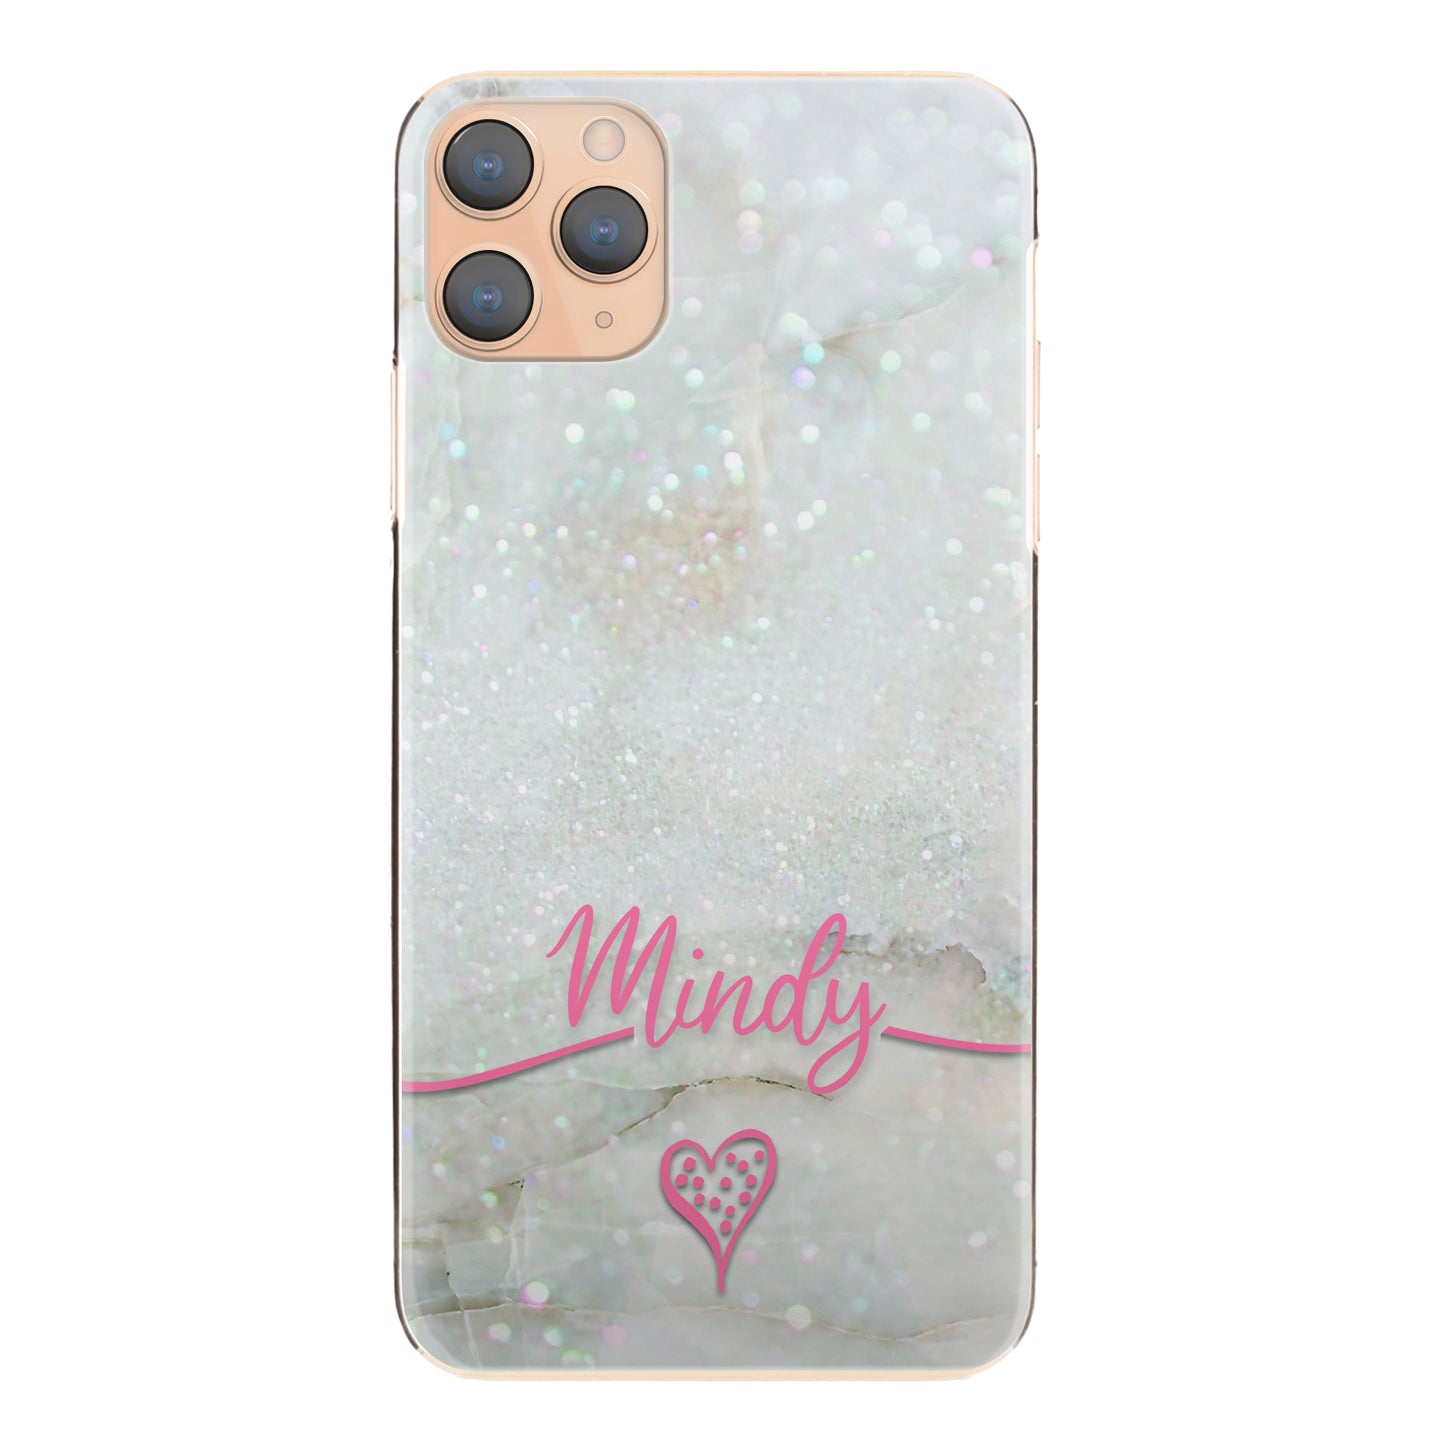 Personalised Nokia Phone Hard Case with Heart Accented Pink Text on Crystal Marble